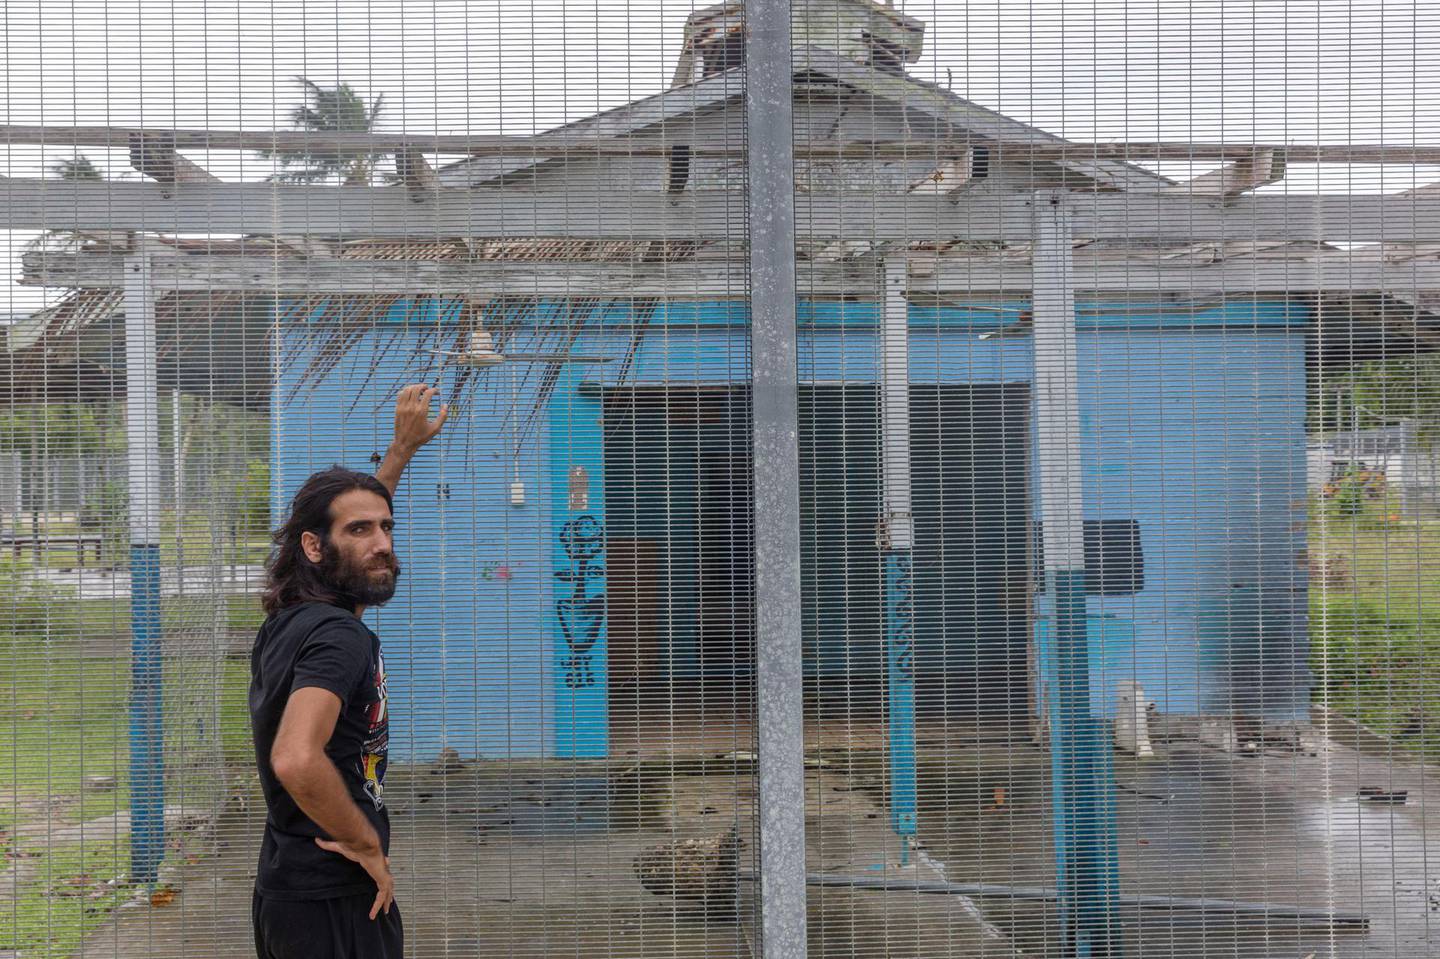 MANUS ISLAND, PAPUA NEW GUINEA - 2018/02/06: Asylum seeker Behrouz Boochani, stands outside the  abandoned naval base on Manus island, where he and other asylum seekers were locked up for the first three years.

The human cost of Australias offshore detention policy has been high for those unfortunate enough to have been caught in its net. For asylum seekers trapped on the remote island of Manus in Papua New Guinea, the future remains as uncertain as ever. Australias offshore detention center there was destroyed in 31 October 2017 but for the 600 or so migrants who remain on the remote Pacific island, little has changed. The asylum seekers live with the torment of separation from family and friends and in the shadow of depression and the traumas of their past. (Photo by Jonas Gratzer/LightRocket via Getty Images)